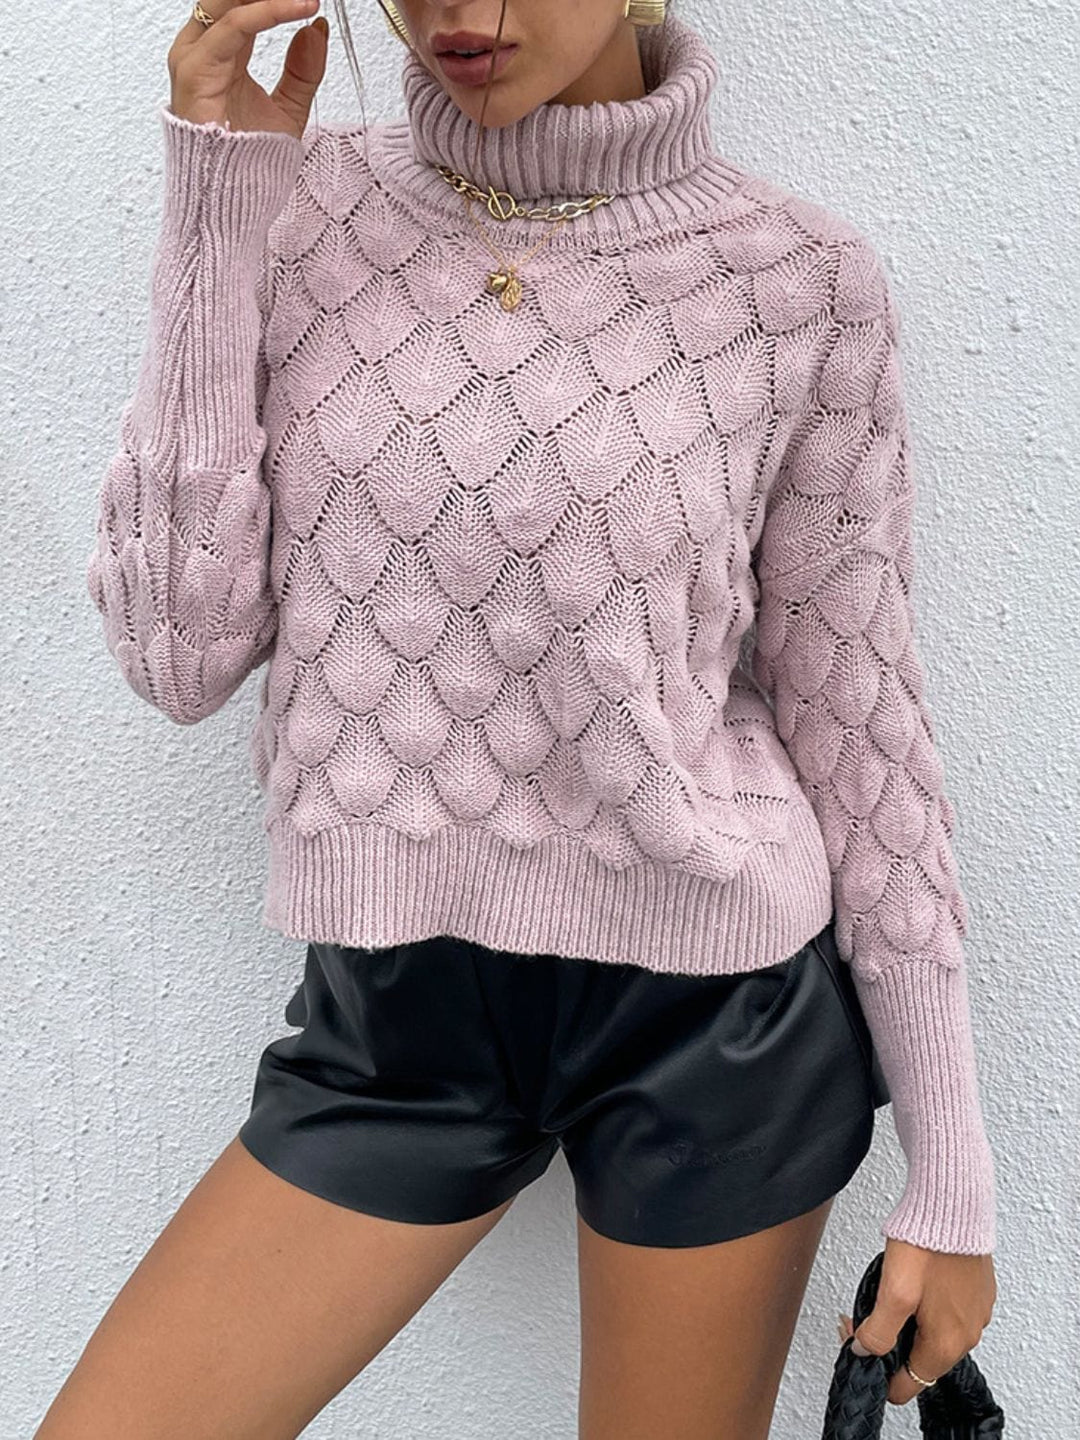 The802Gypsy sweater GYPSY-Turtle Neck Ribbed Sweater